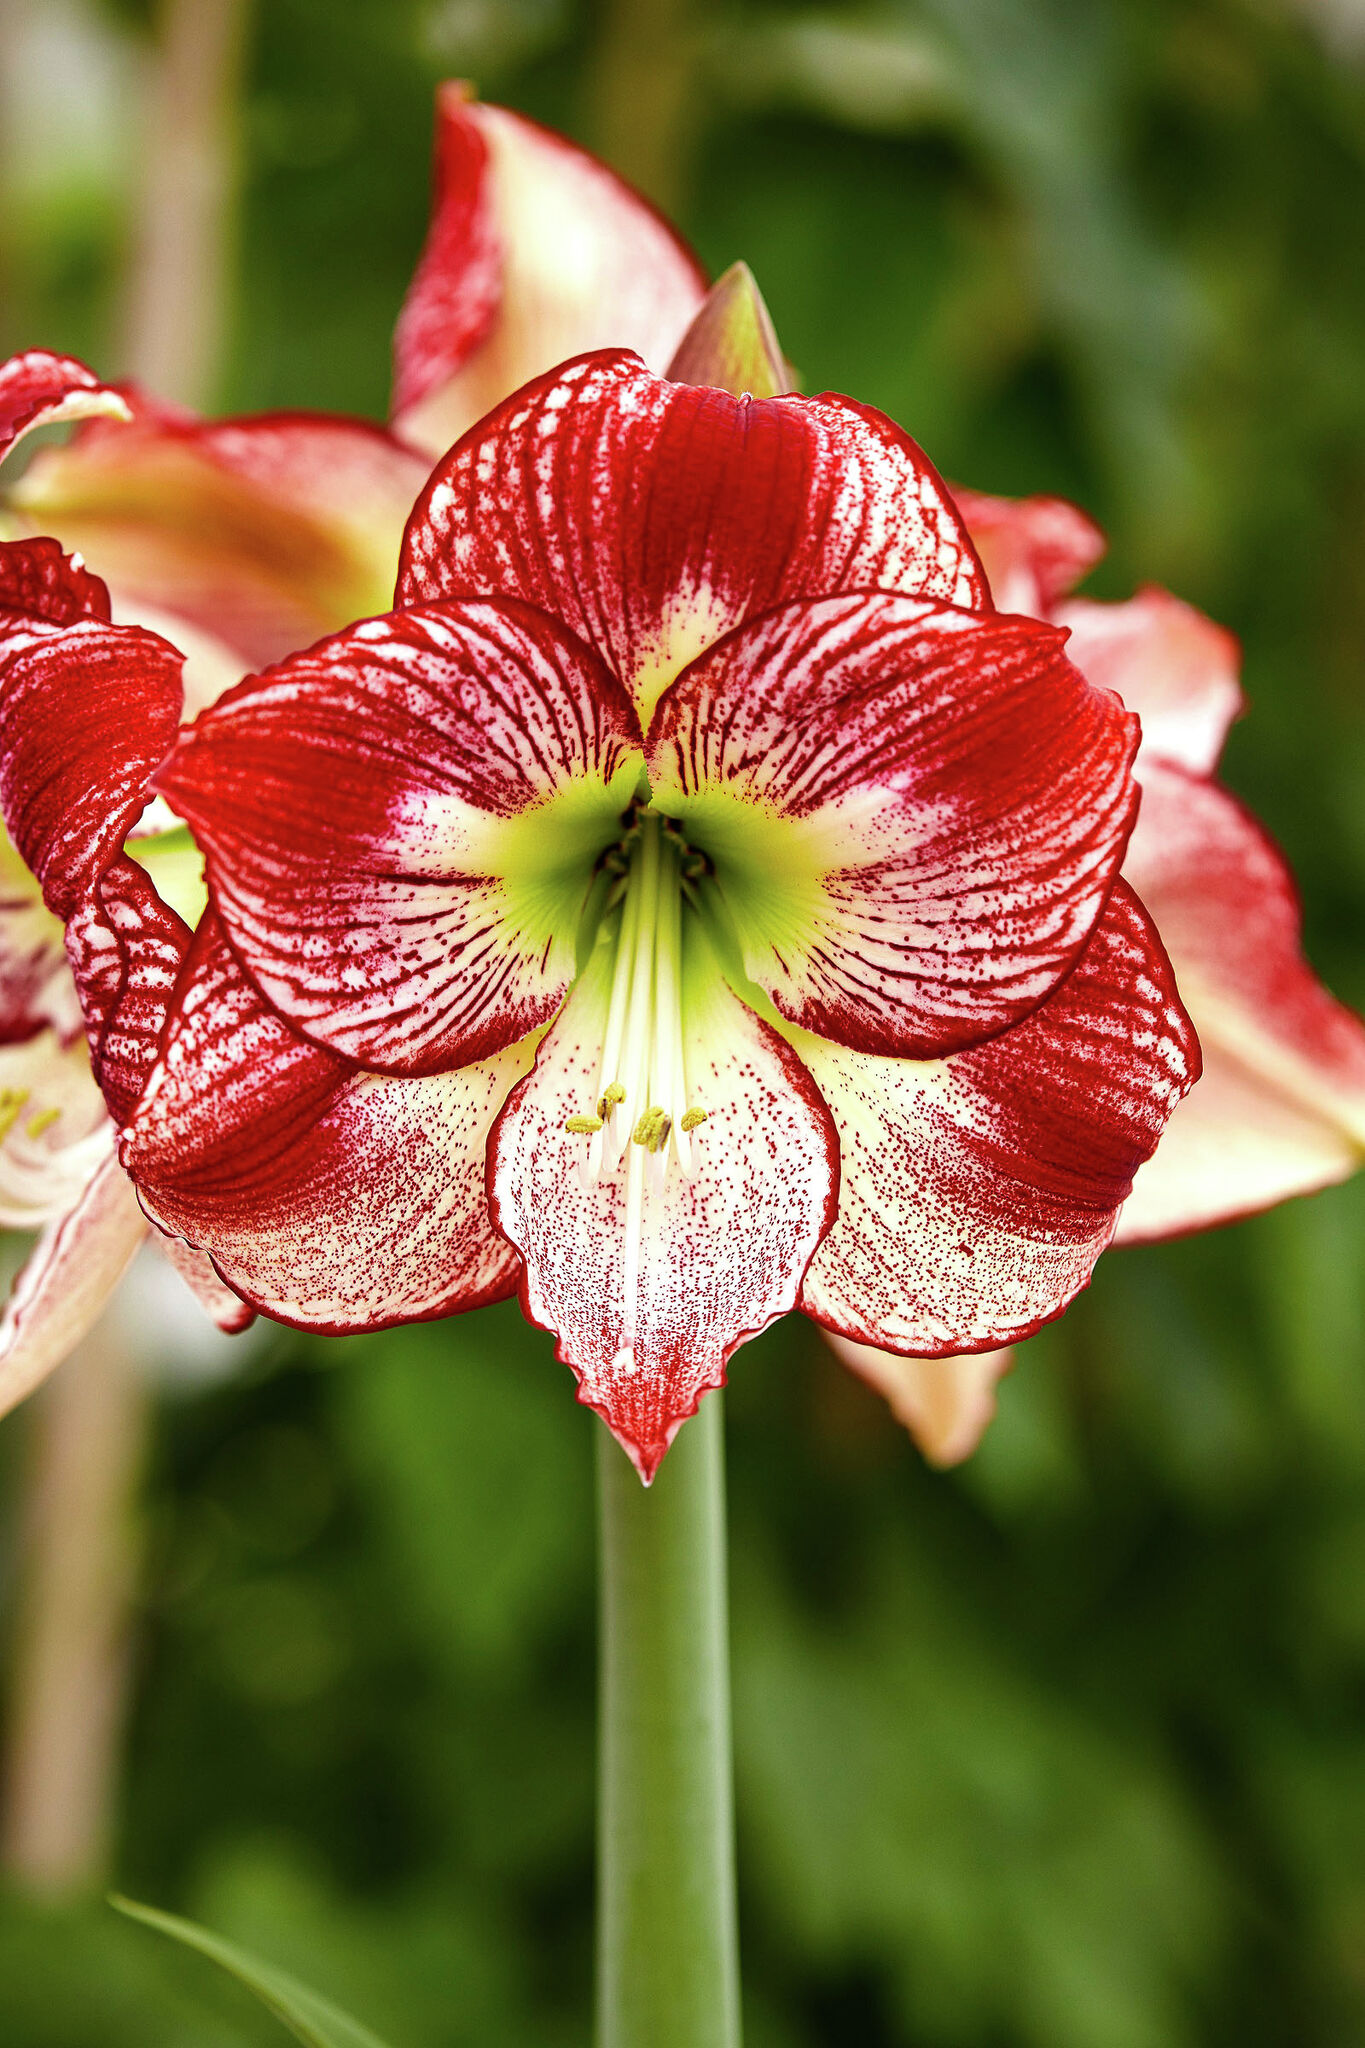 Gardening Go beyond traditional with unique amaryllis varieties Journal-Courier